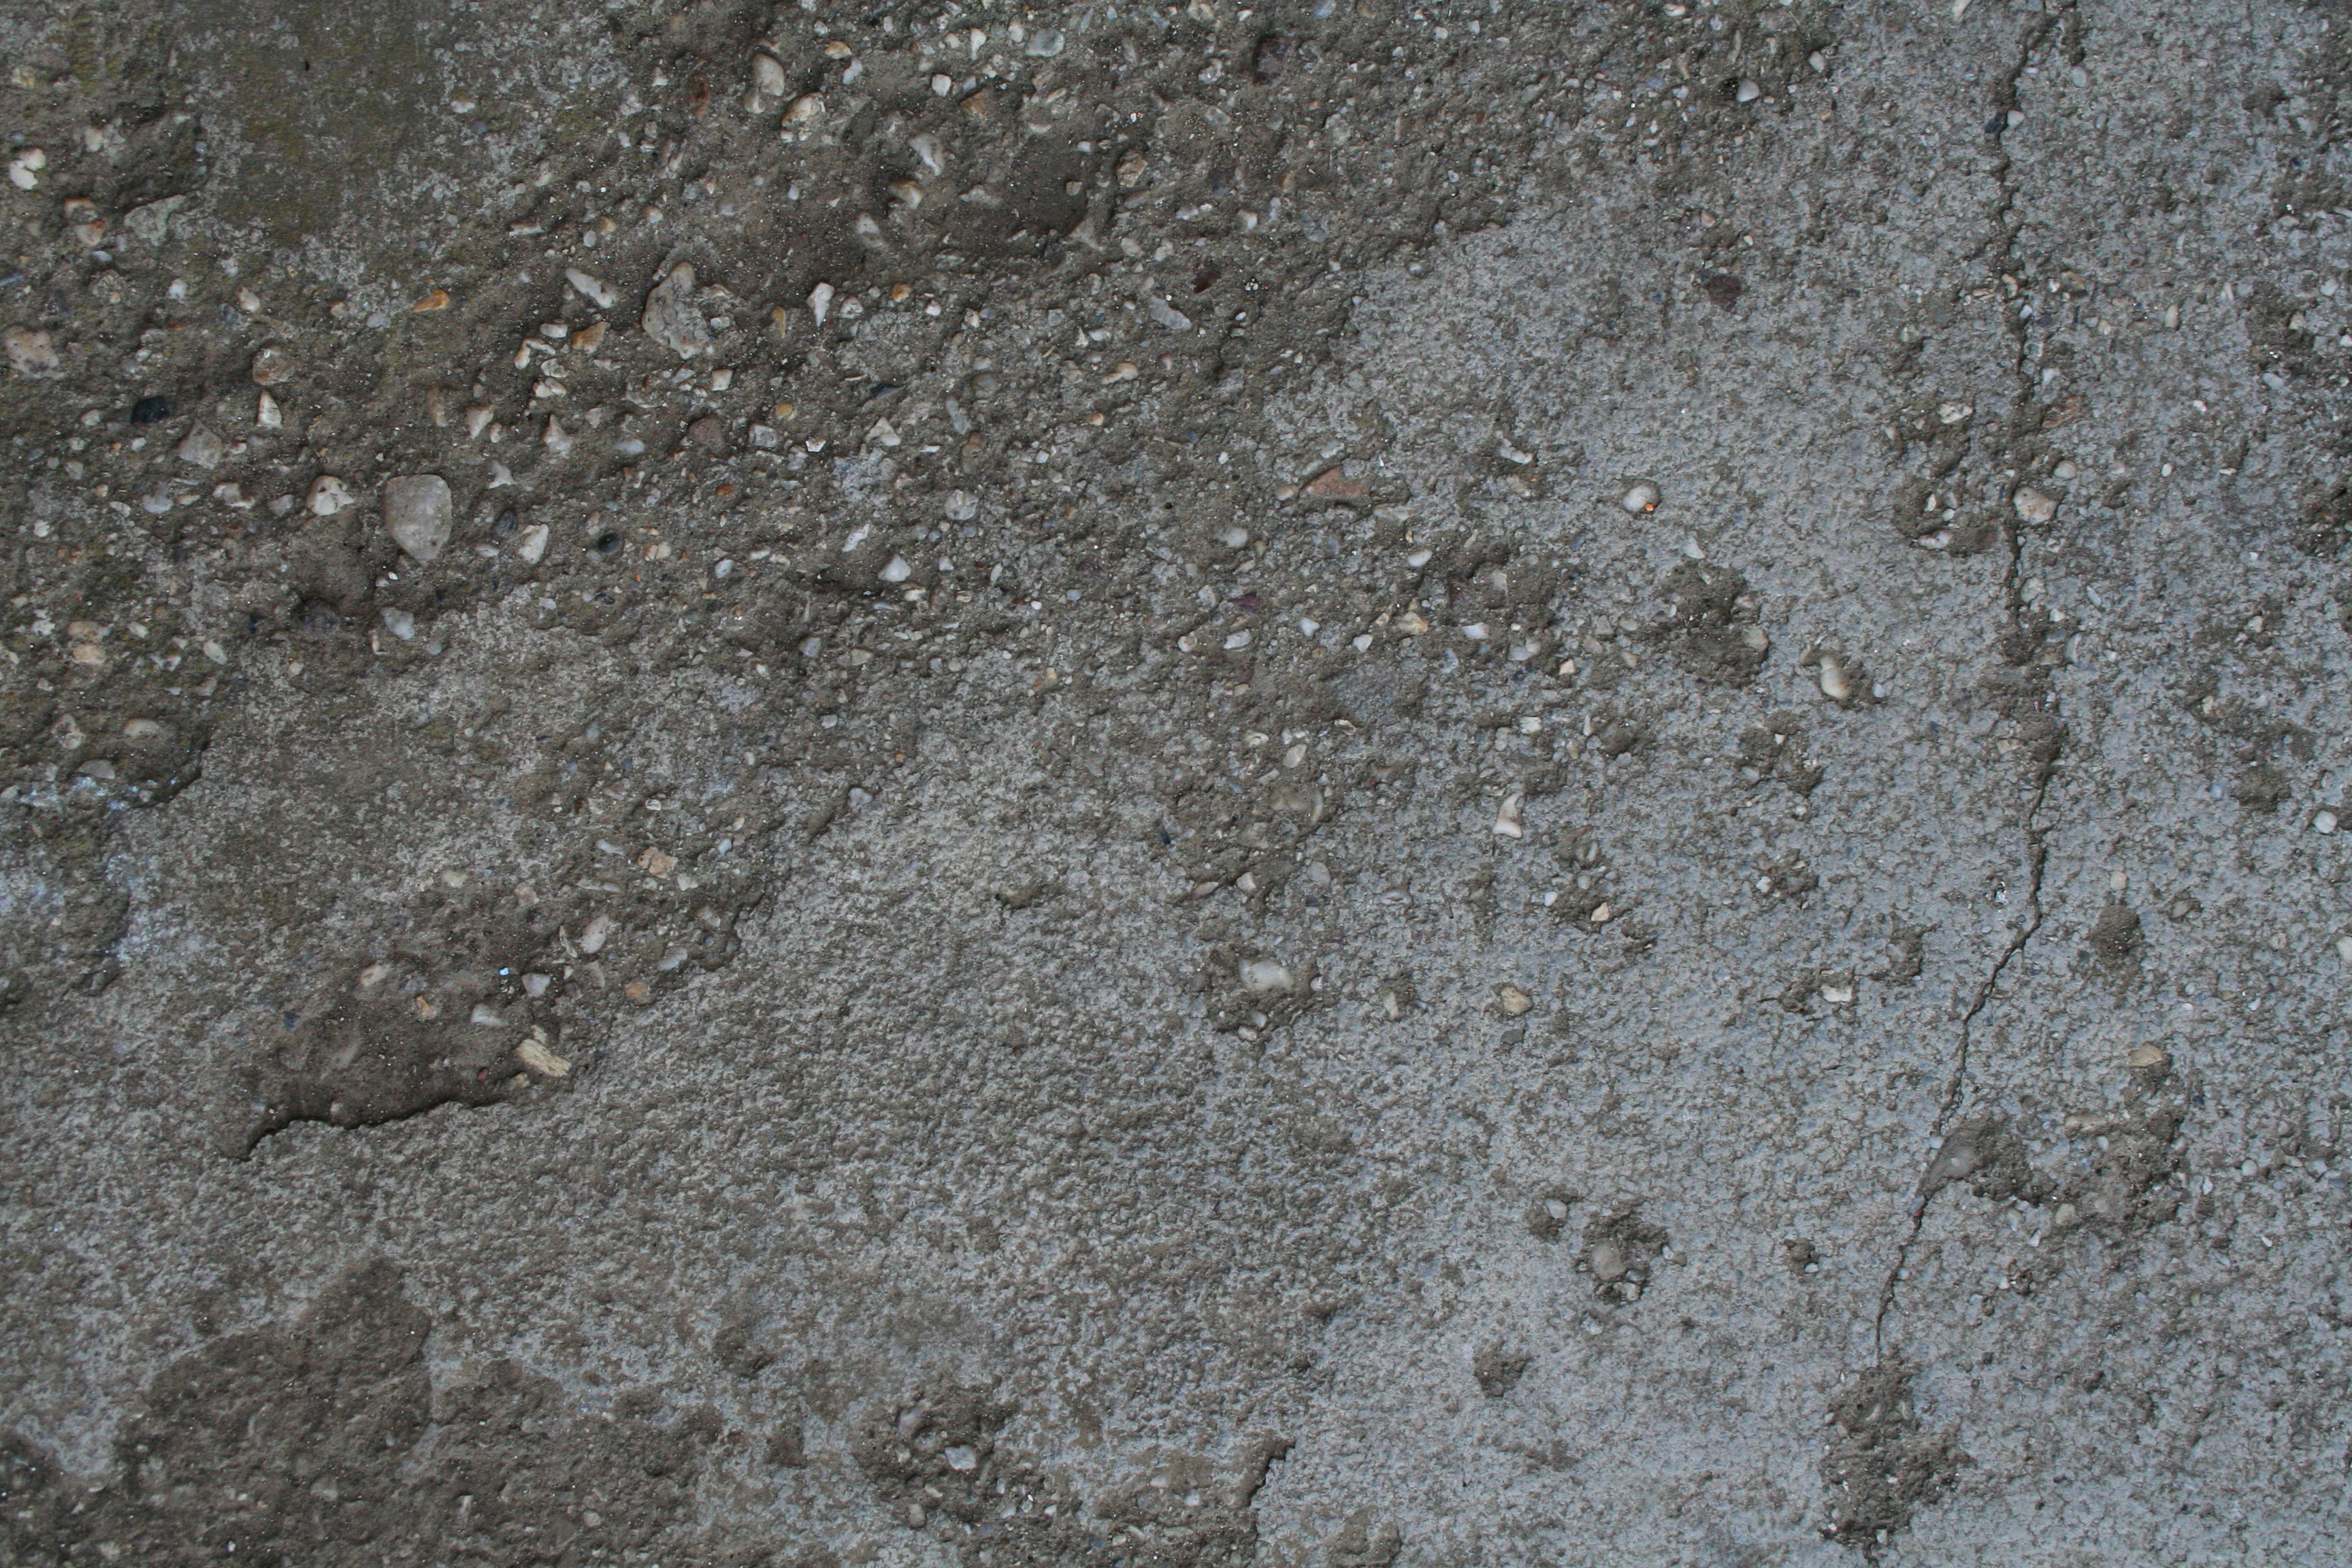 photoshop mockup in how to use free  Grey 20 photoshop Textures  Concrete Texture for